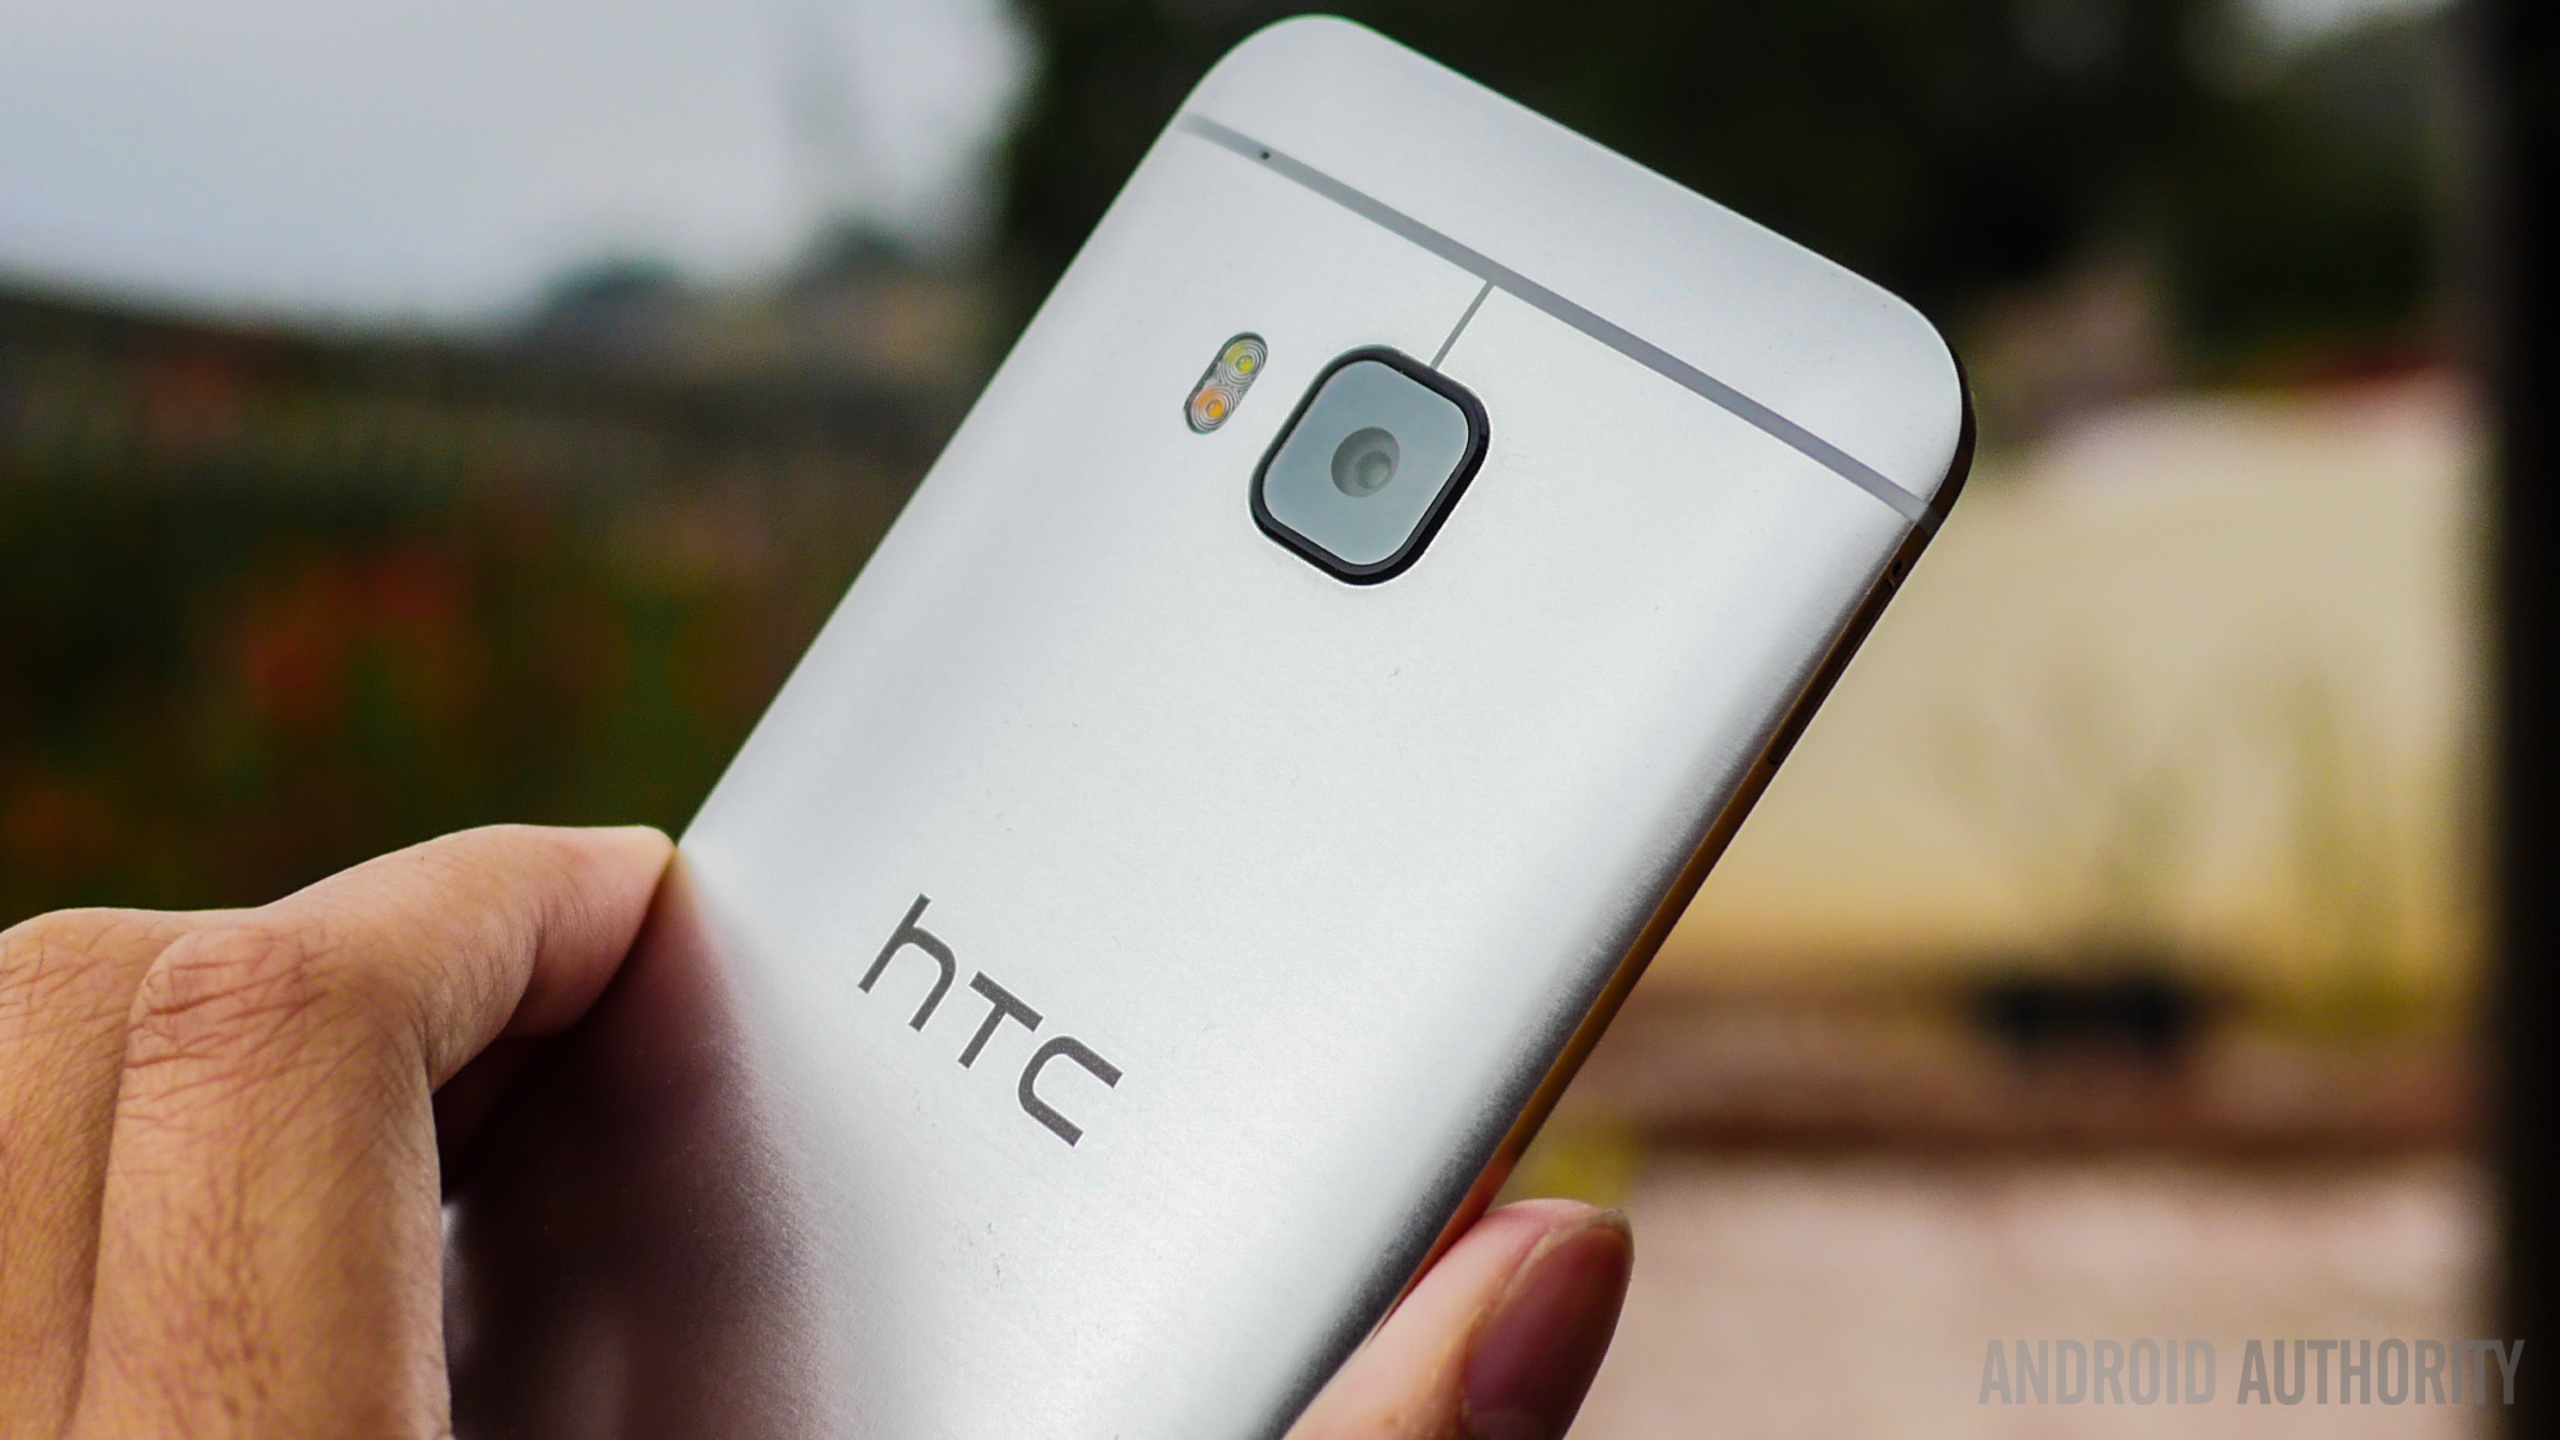 HTC's One M9 is powered by the Snapdragon 810